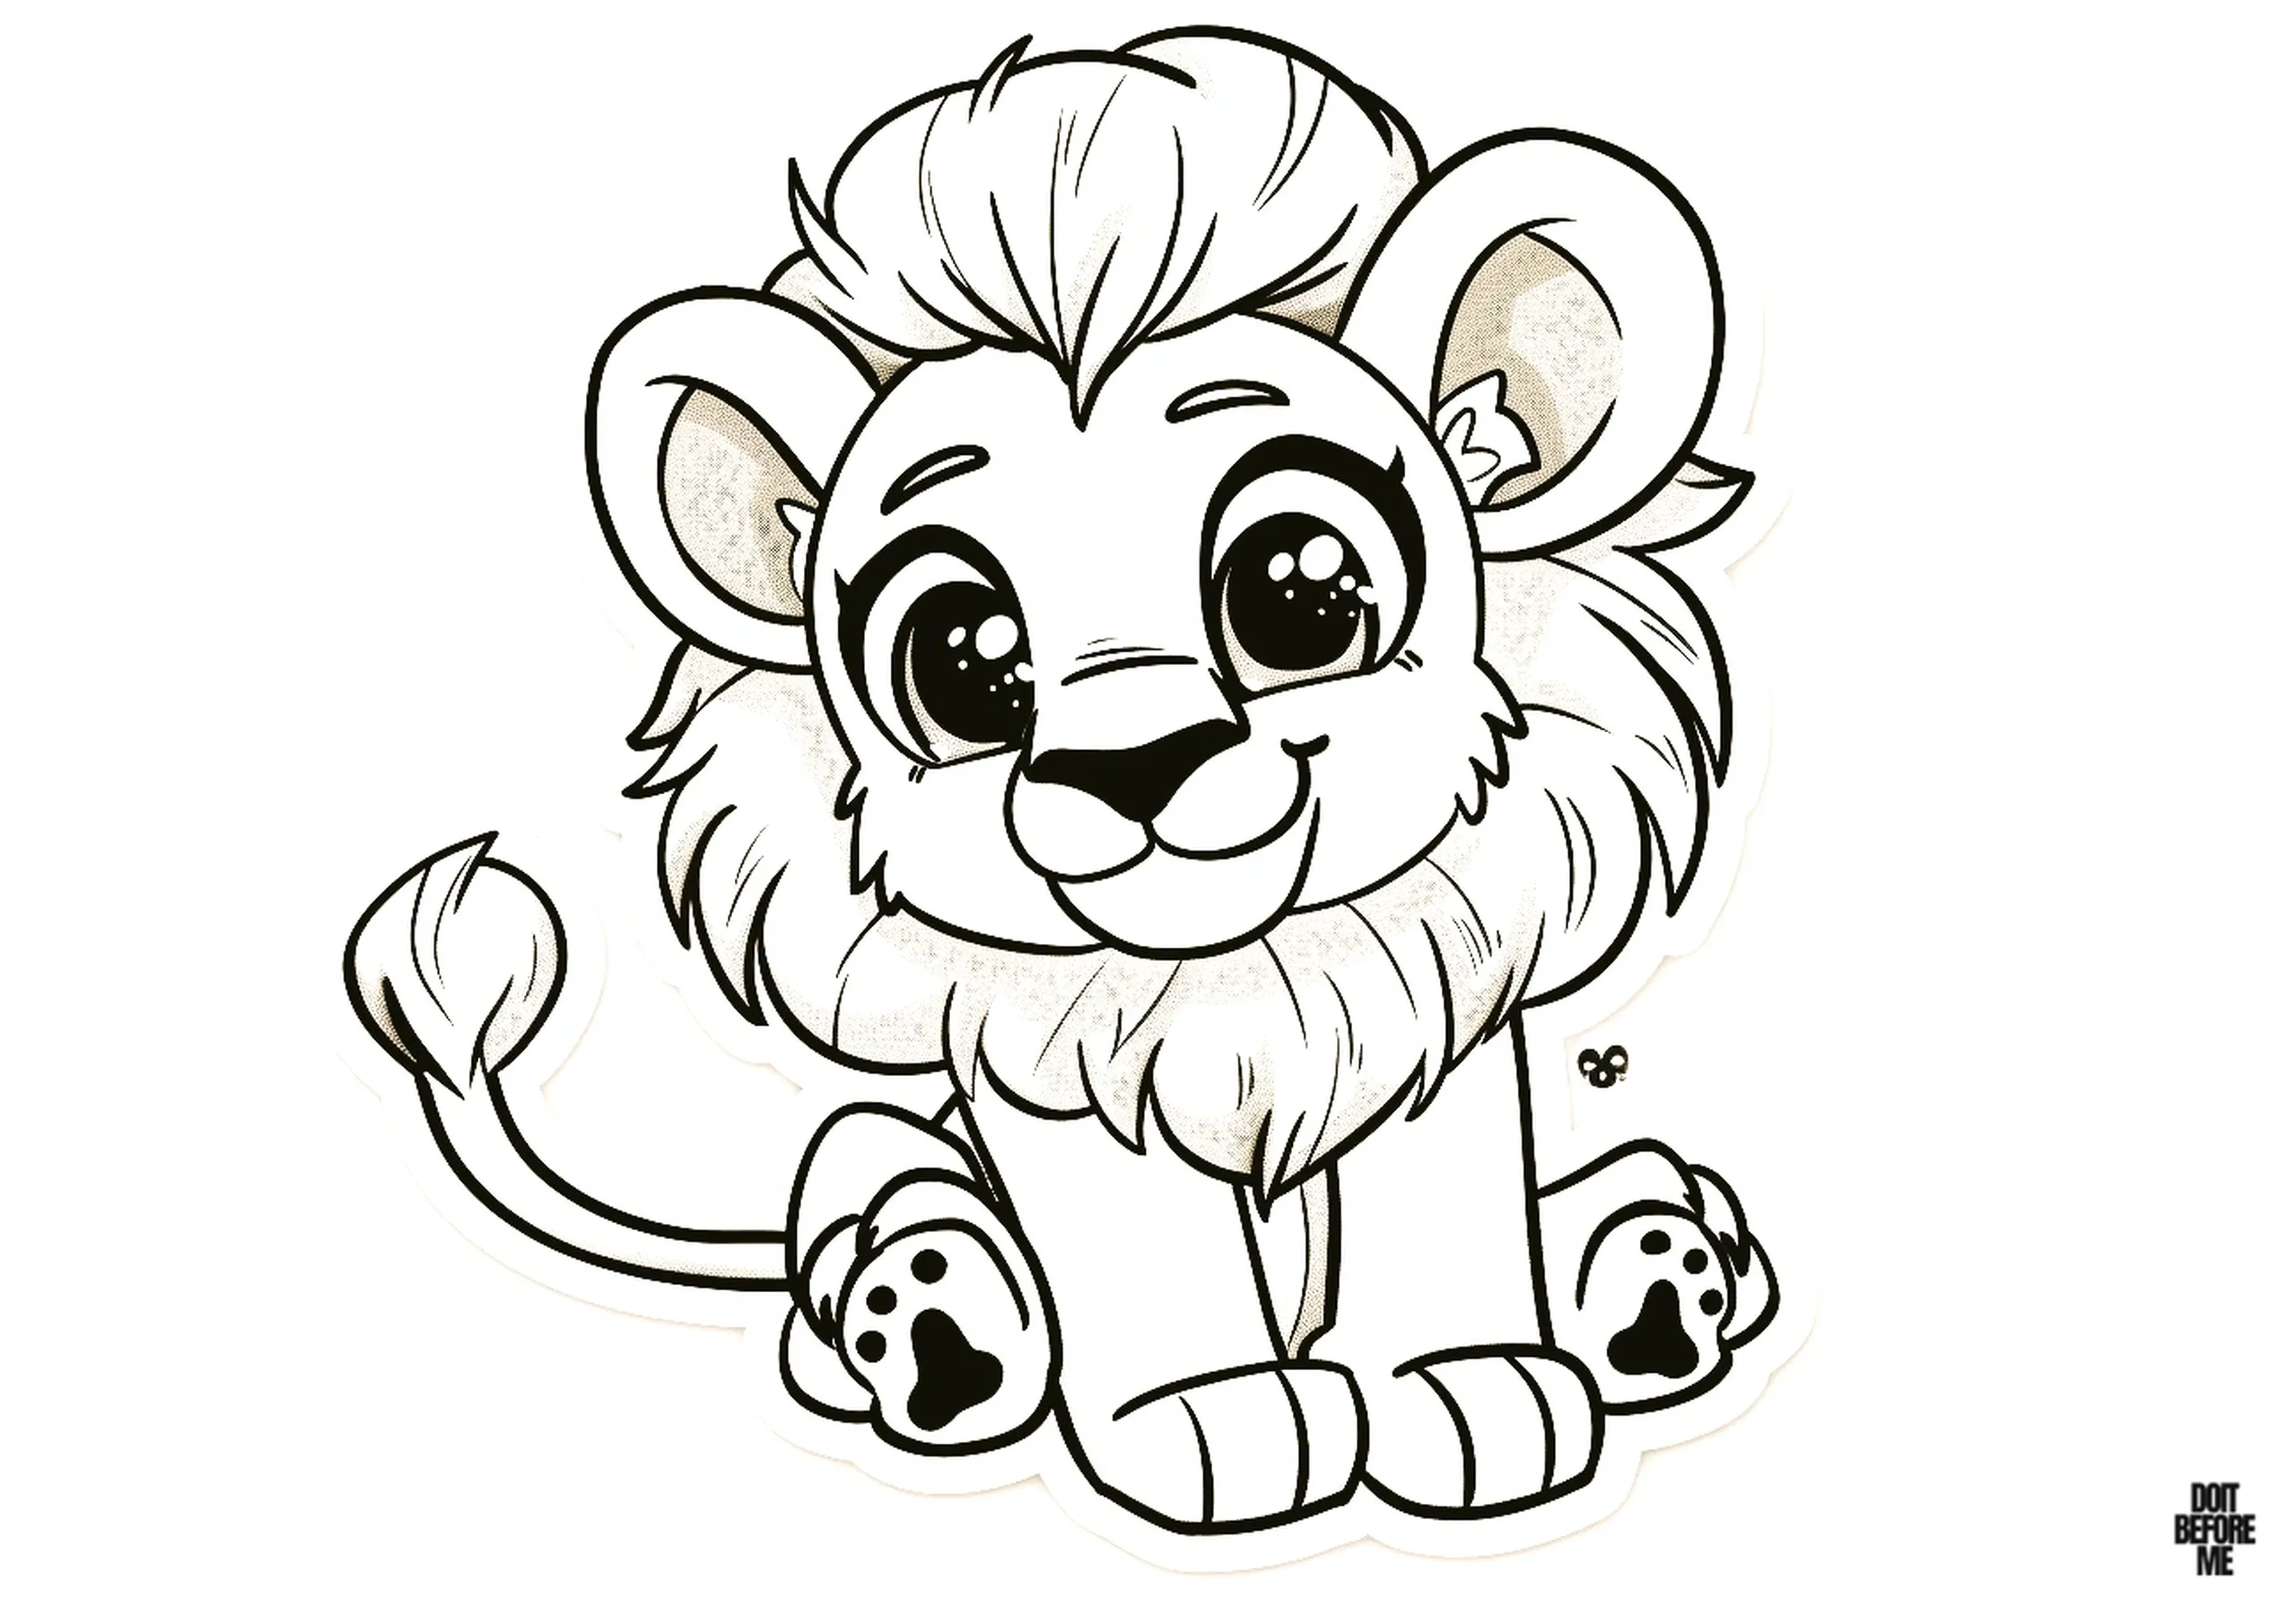 Free printable coloring page for kids featuring a vibrant male lion cub with a majestic mane, suitable for boys, toddlers, and preschoolers.